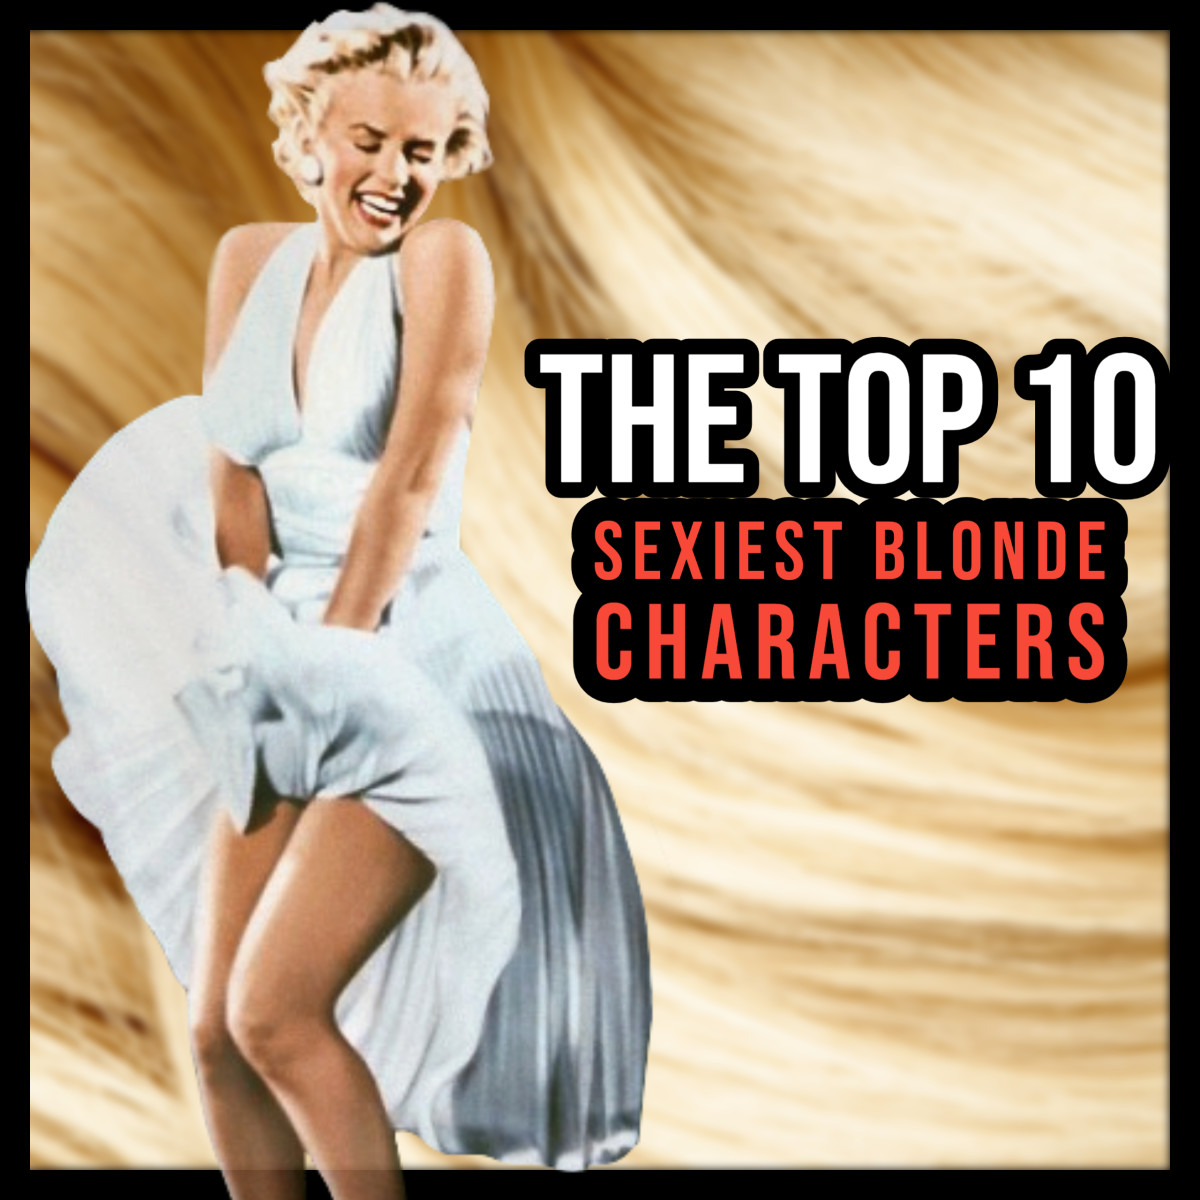 From Tina Carlyle to Catherine Tramell, this article ranks the 10 sexiest blondes of all time.